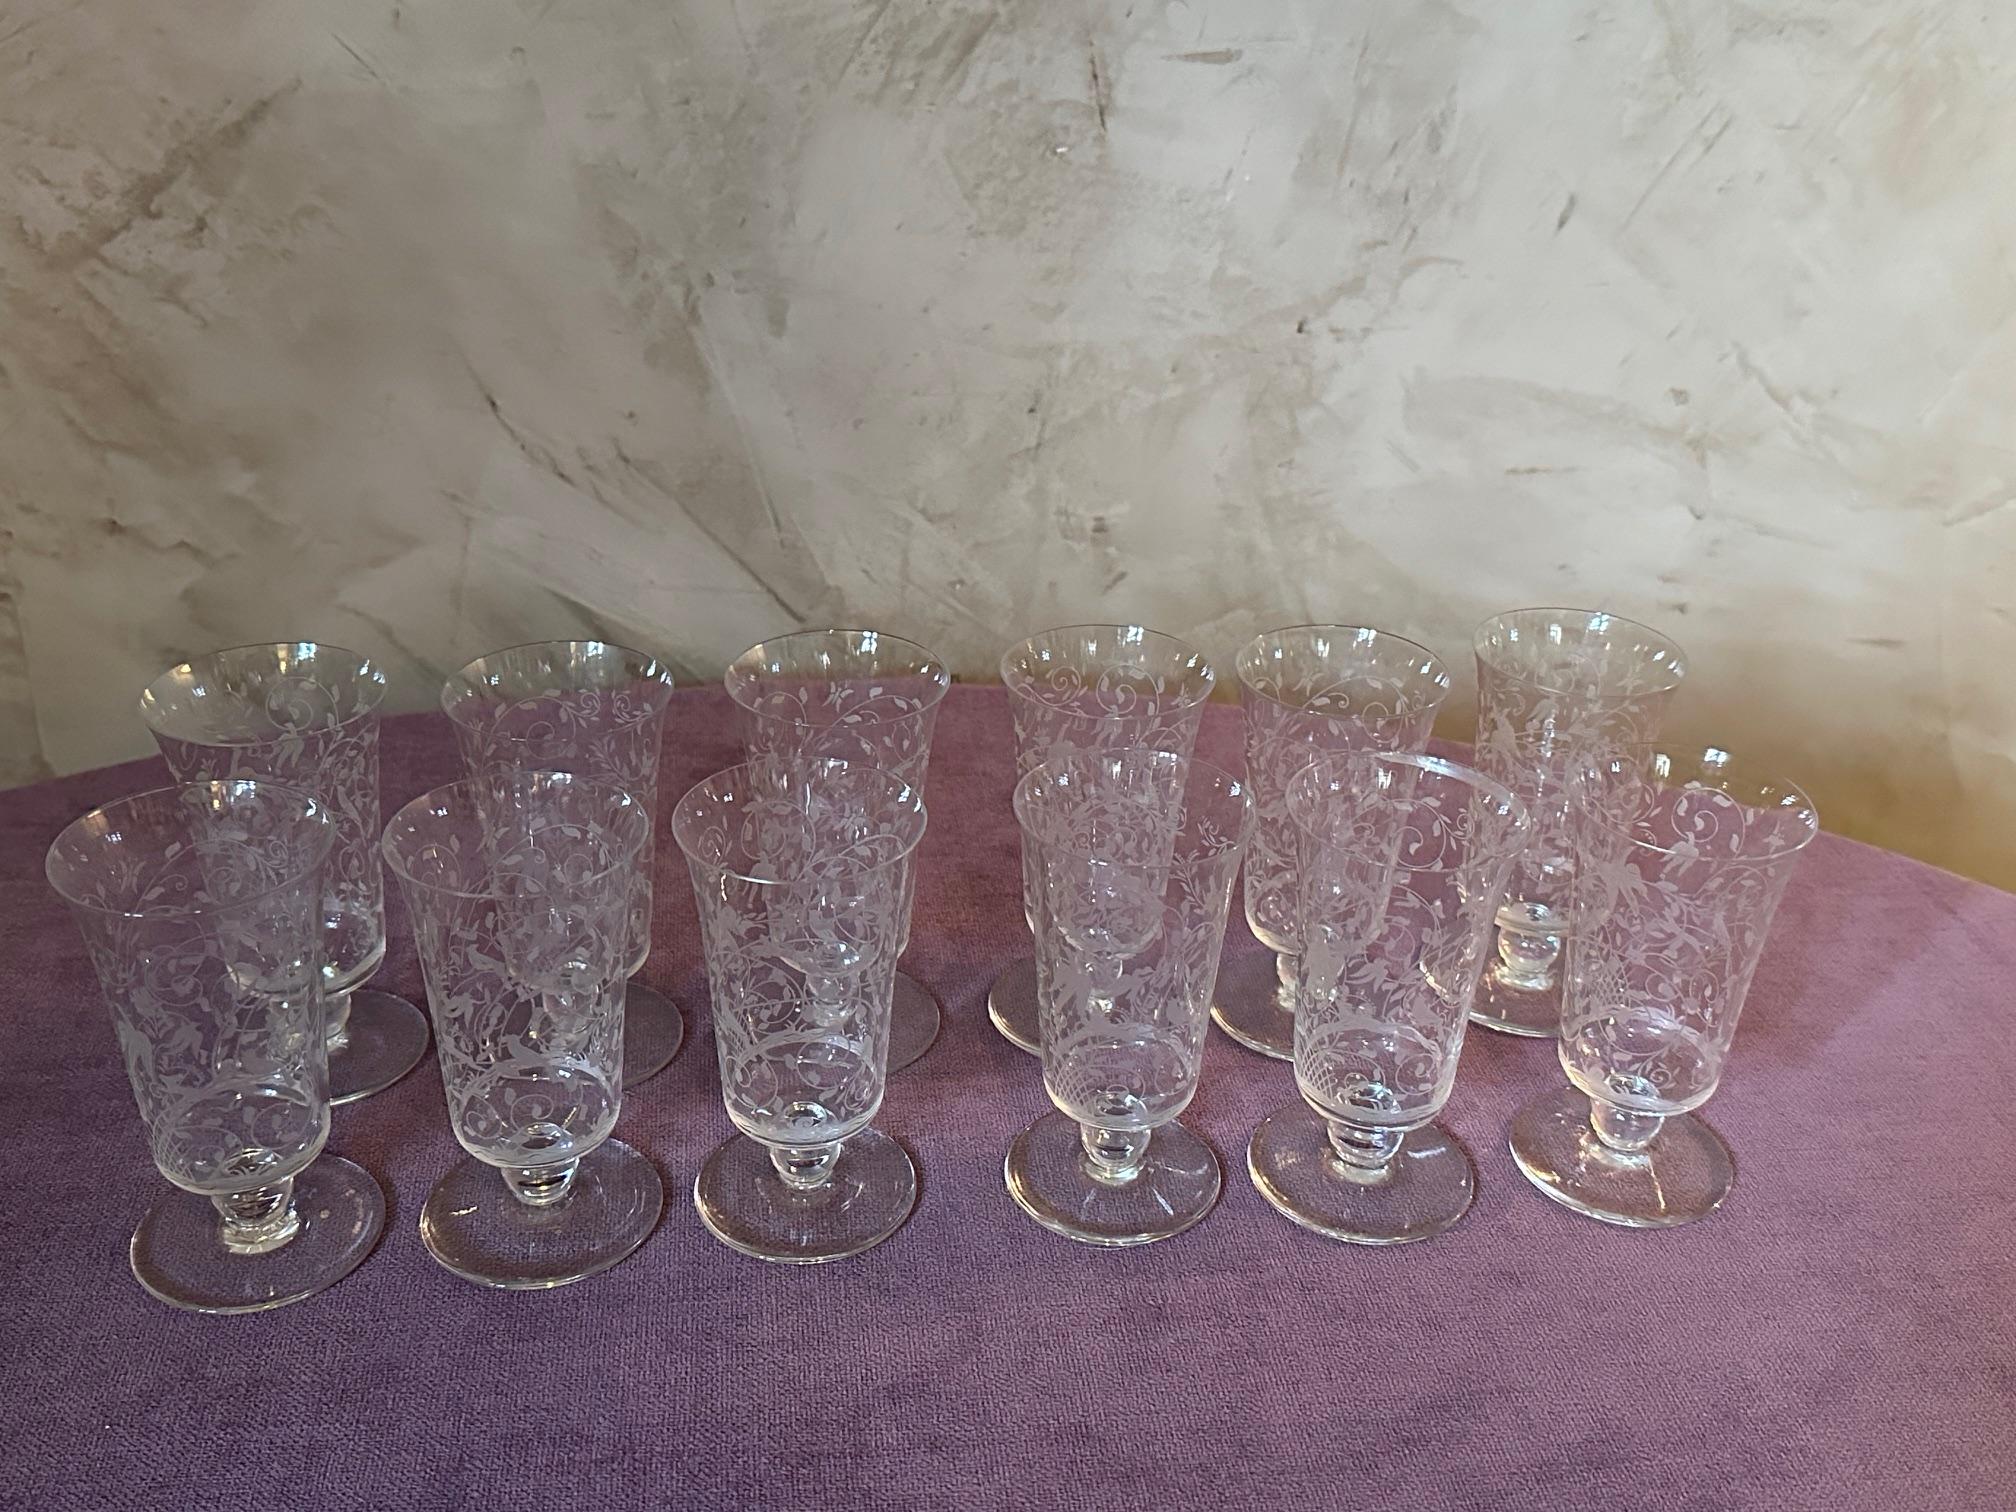 20th century French Set of Crystal Baccarat Glasses, Pitcher and Decanter For Sale 15